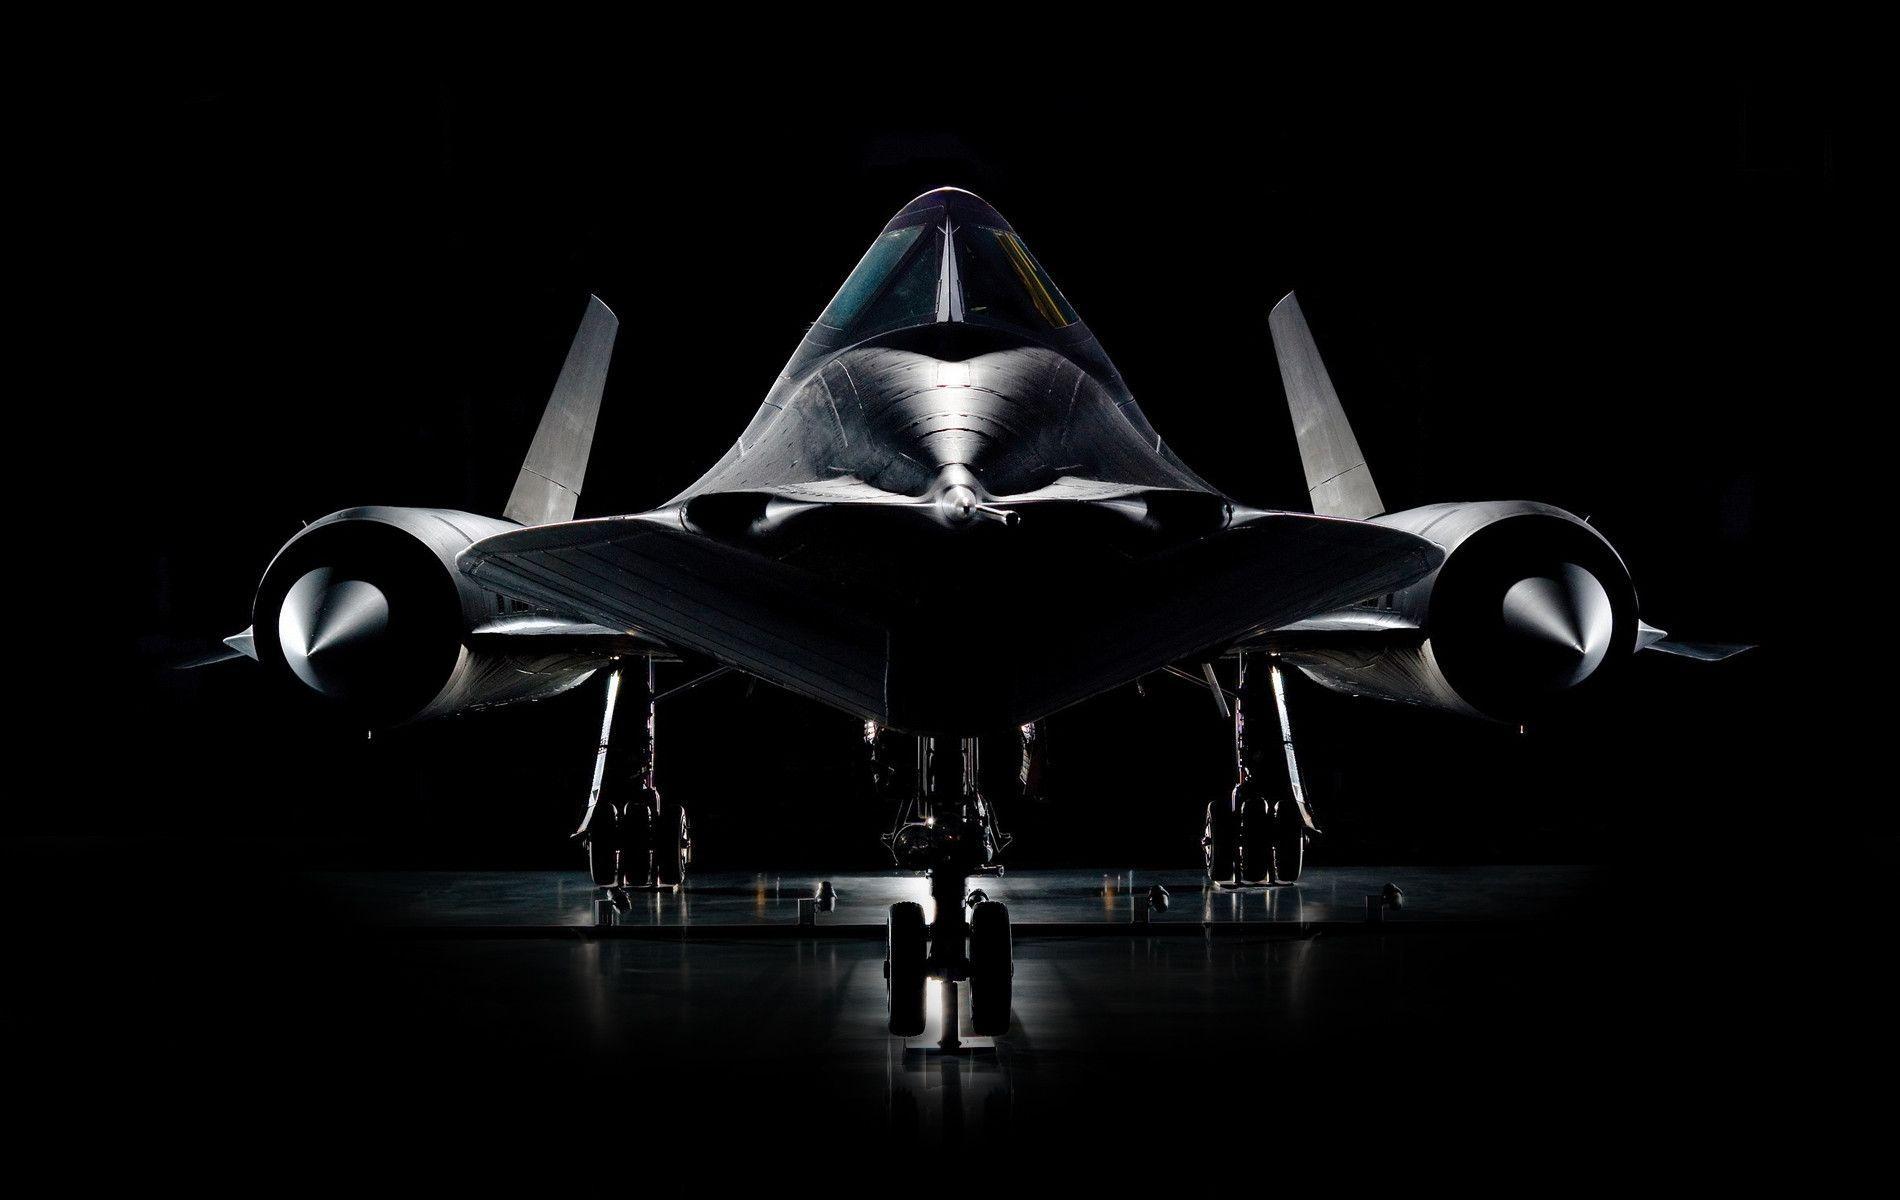 Daily Wallpaper: SR 71 Blackbird. I Like To Waste My Time